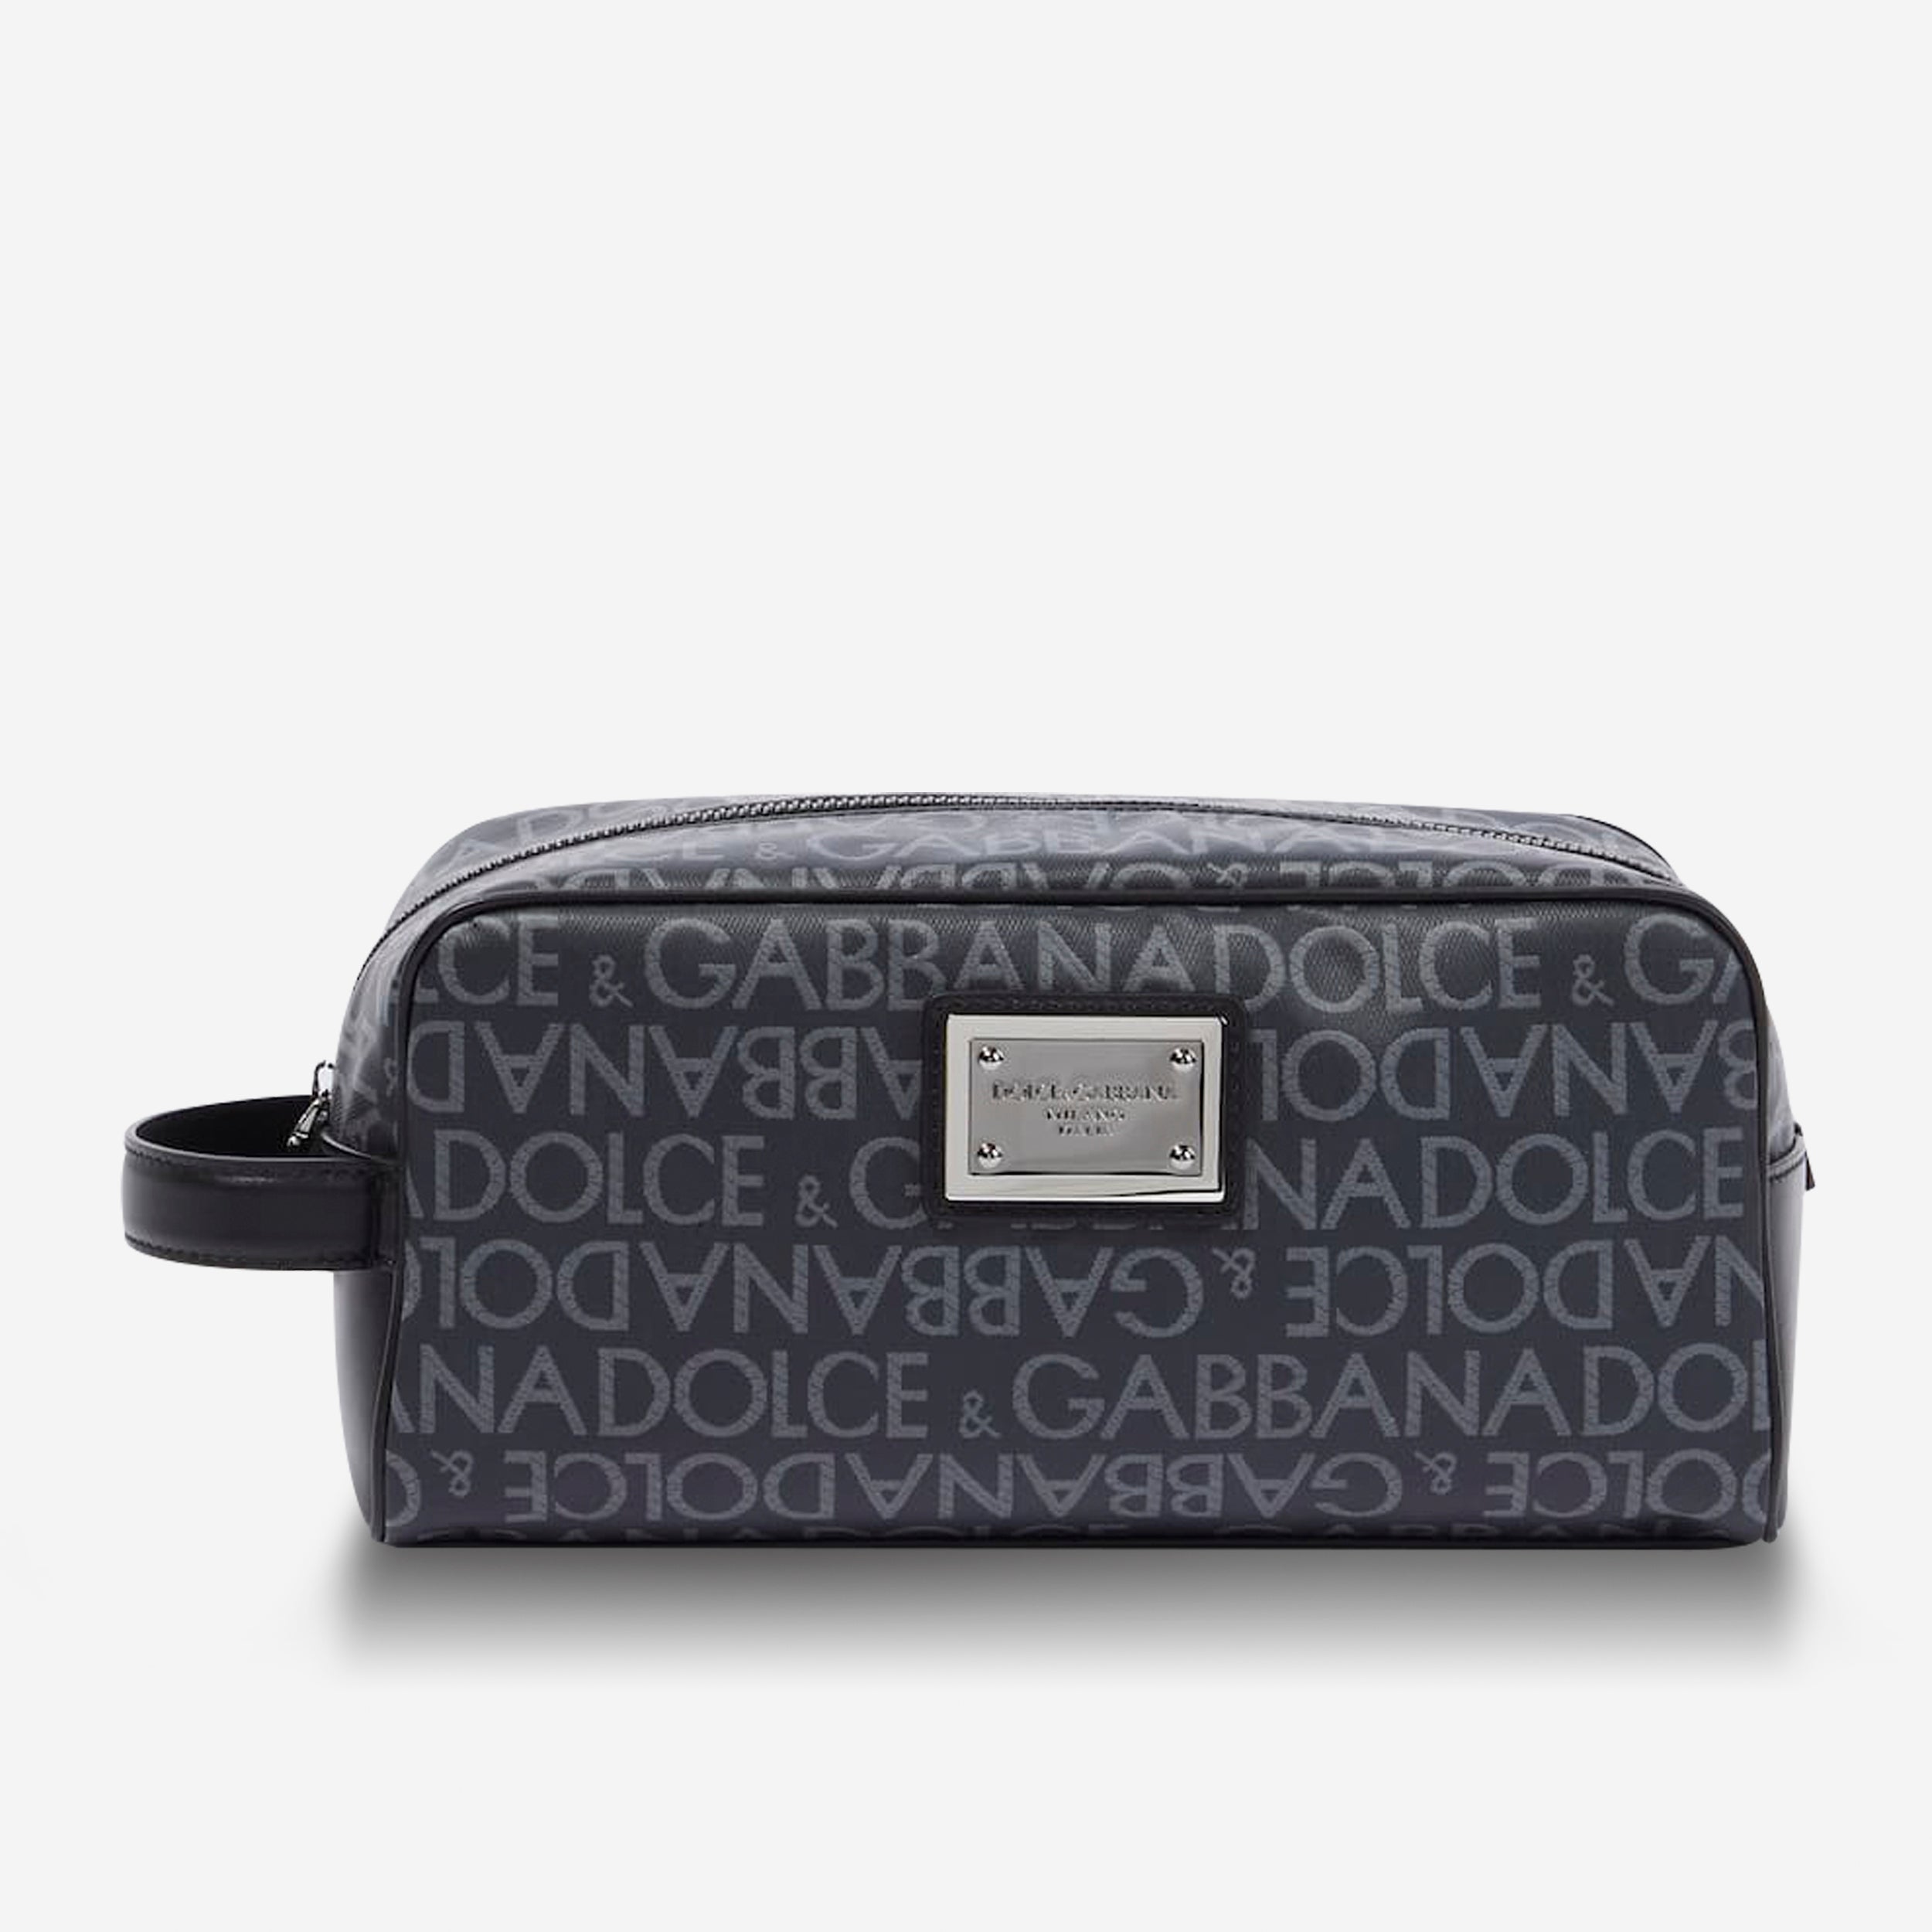 New Gucci Black Leather clutch, Toiletry Bag , With Tags, Comes